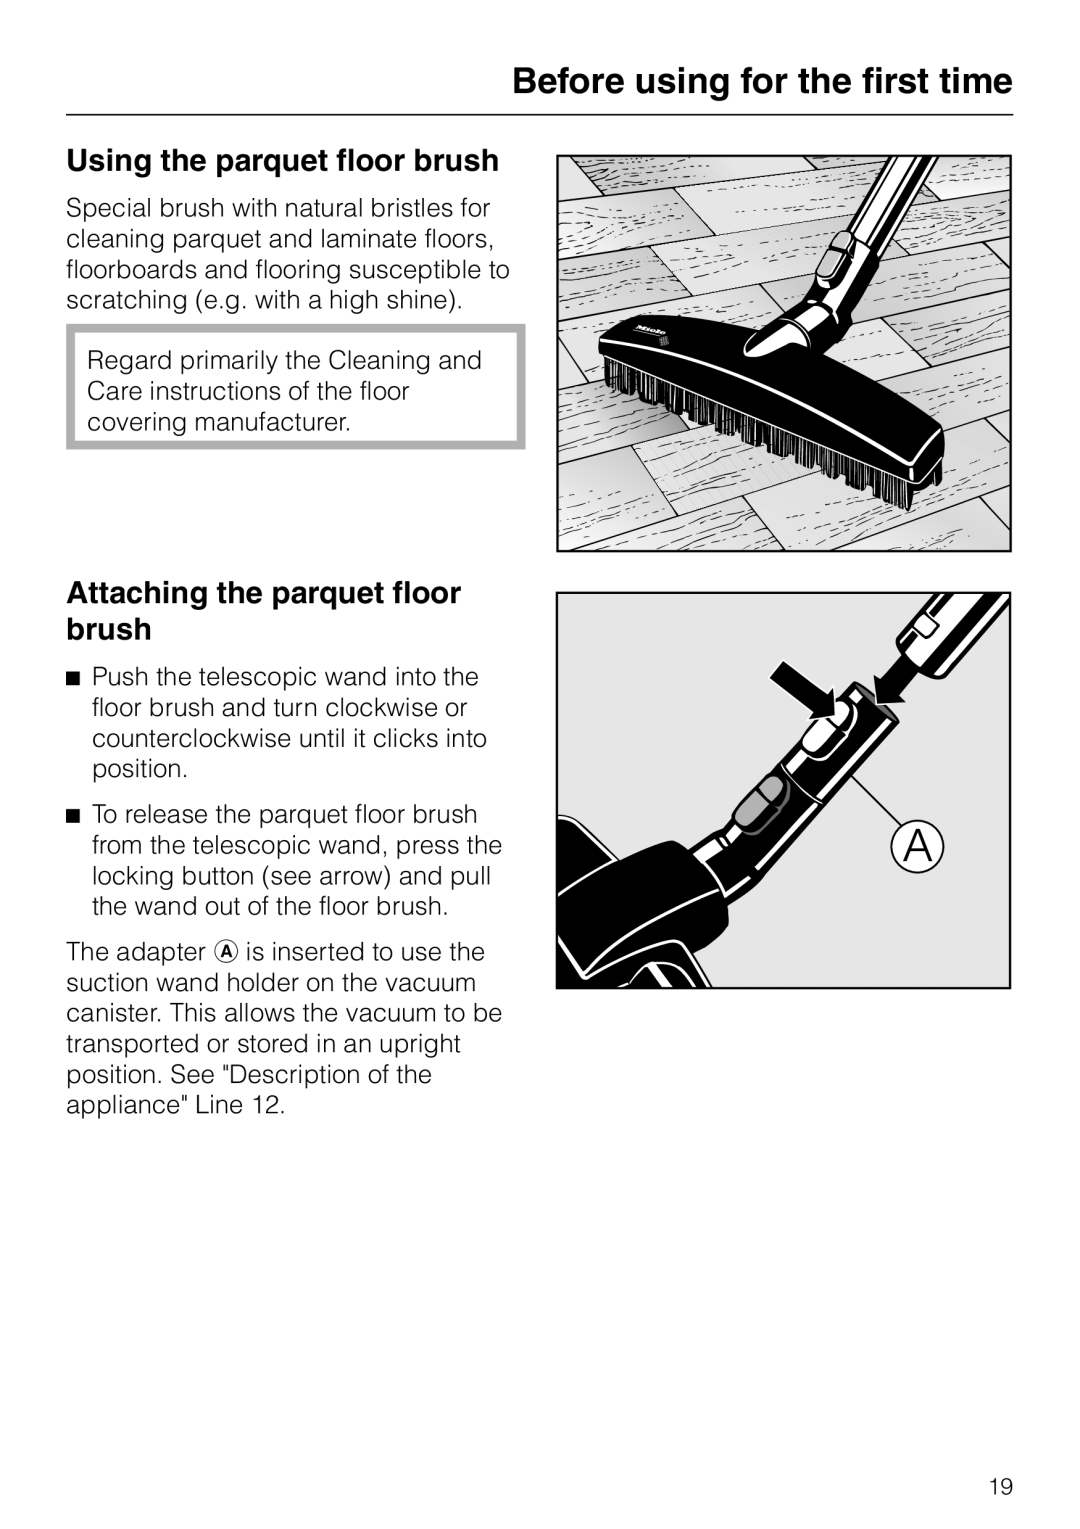 Miele S 558 manual Using the parquet floor brush, Attaching the parquet floor brush, Before using for the first time 